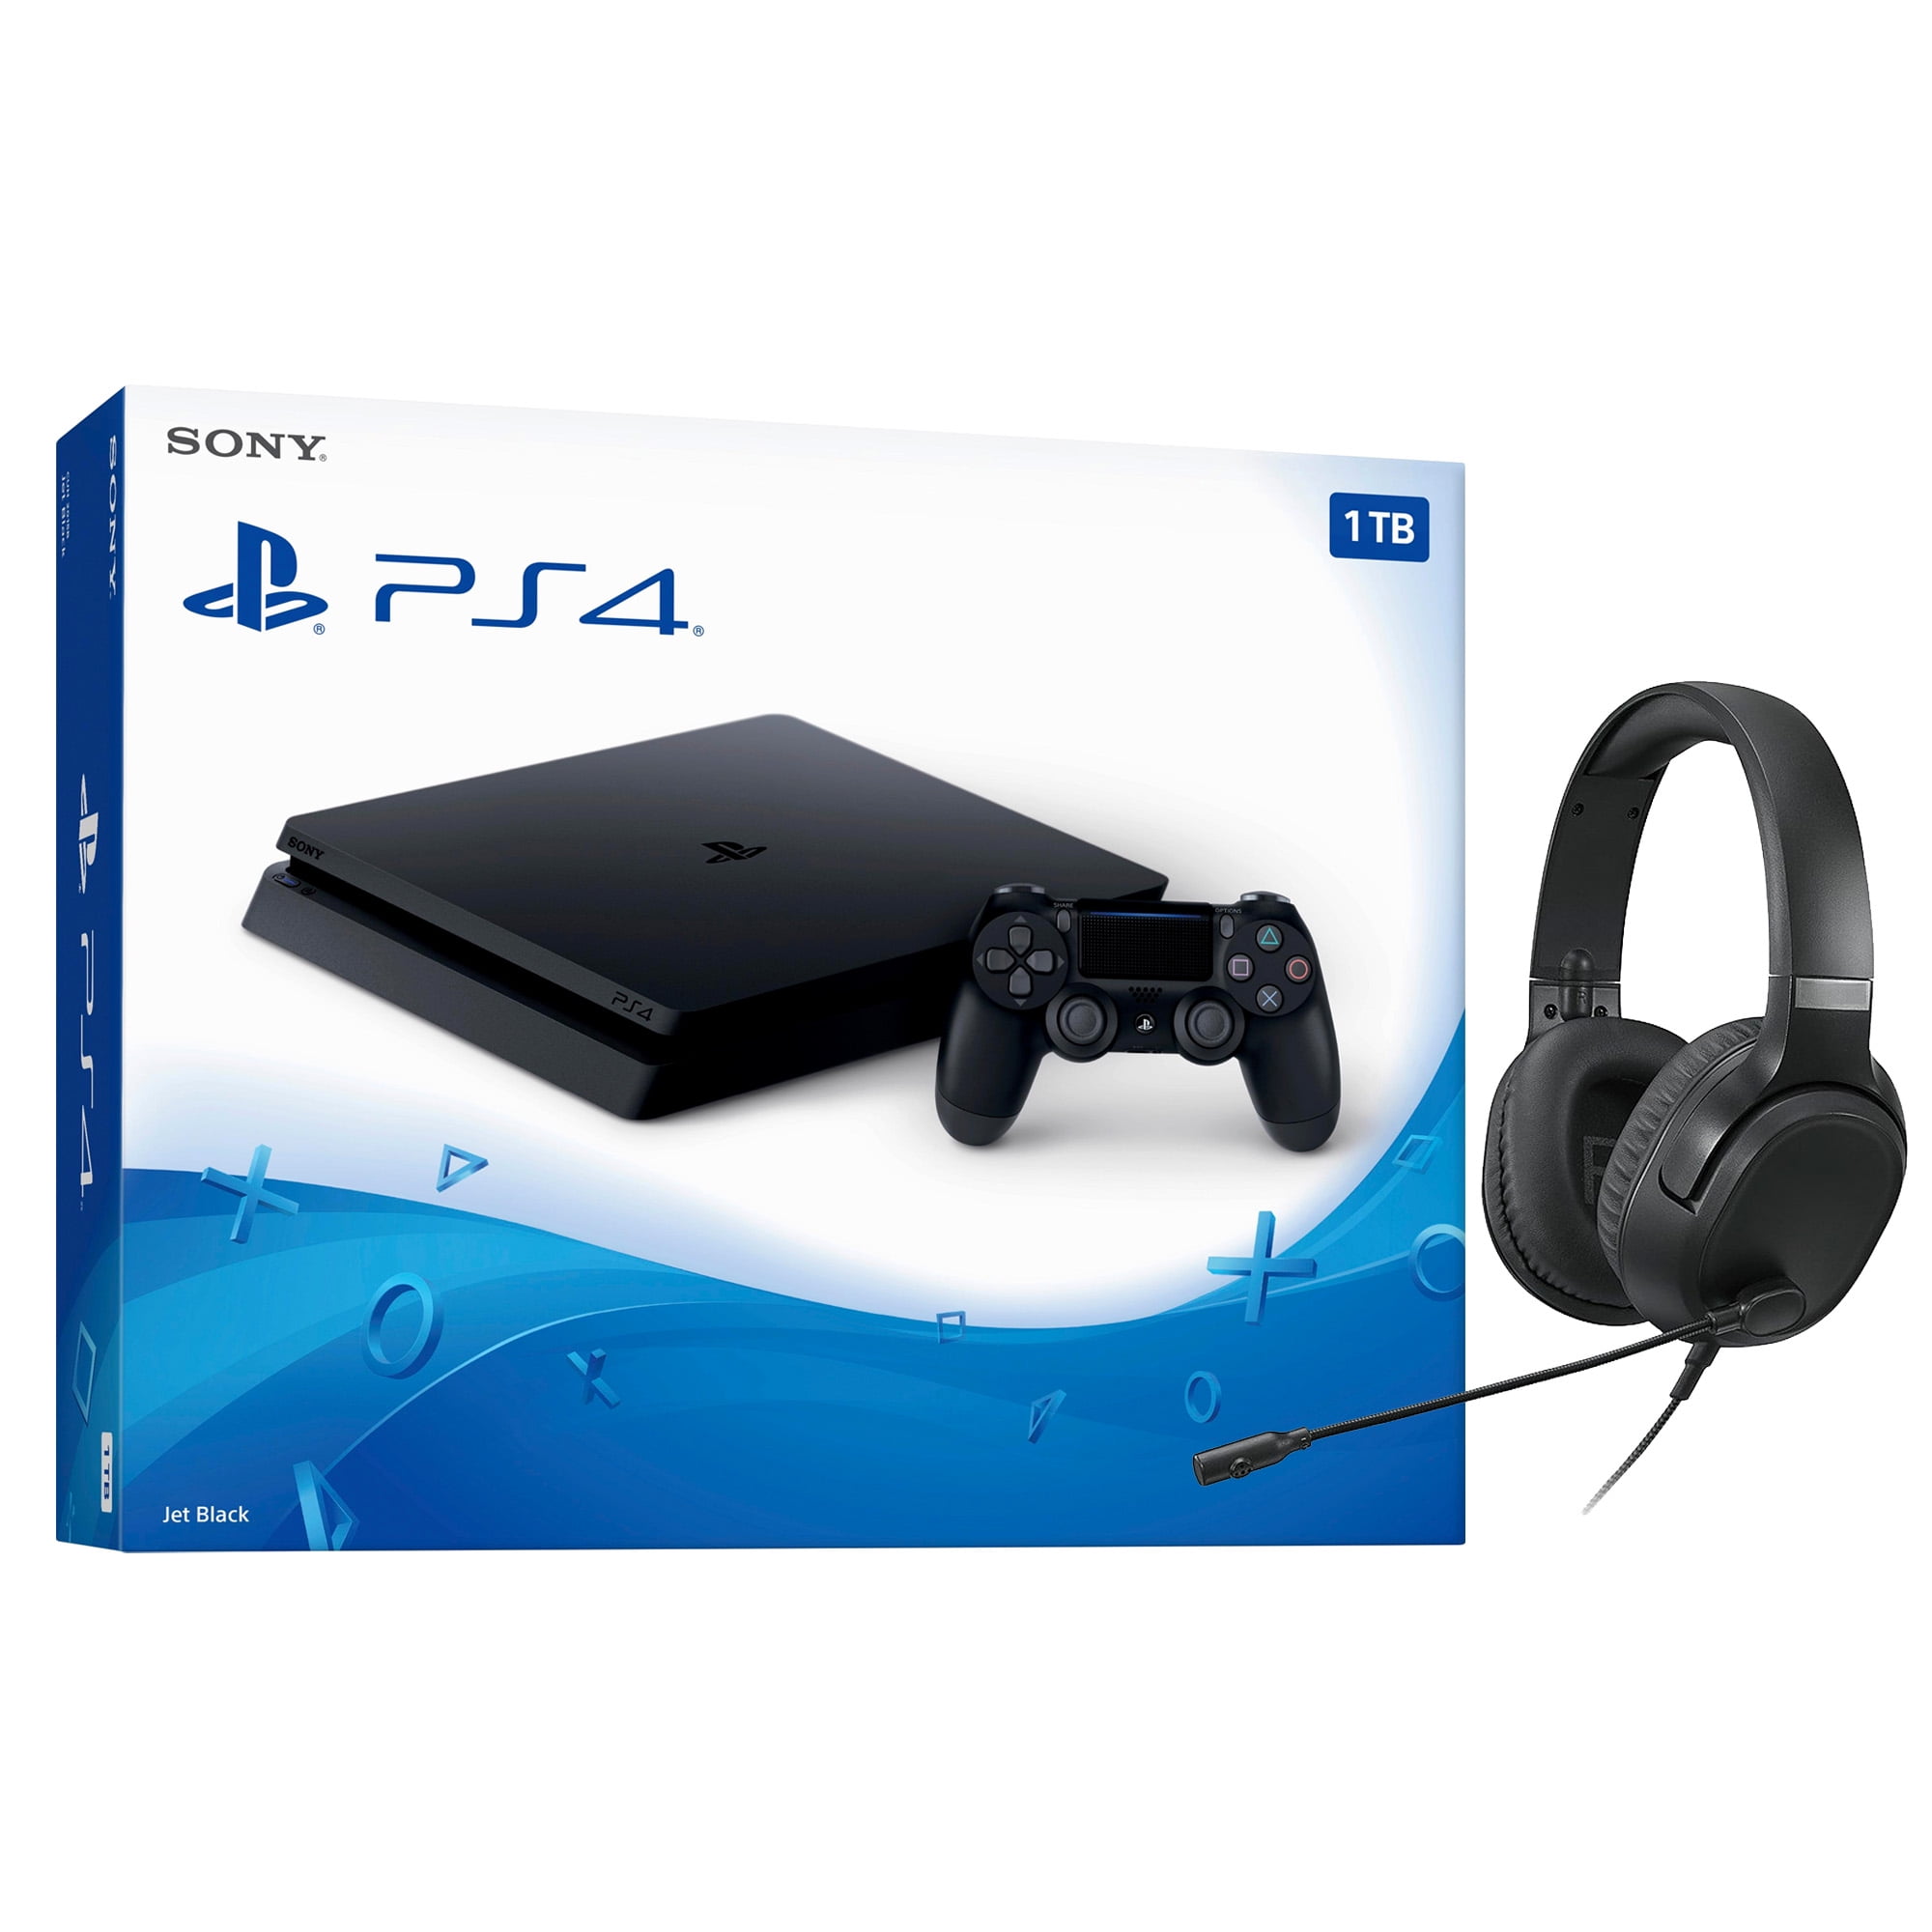 Poging Rusteloos Productie Sony PlayStation 4 Gold Wireless Headset, Rose Gold - Walmart.com